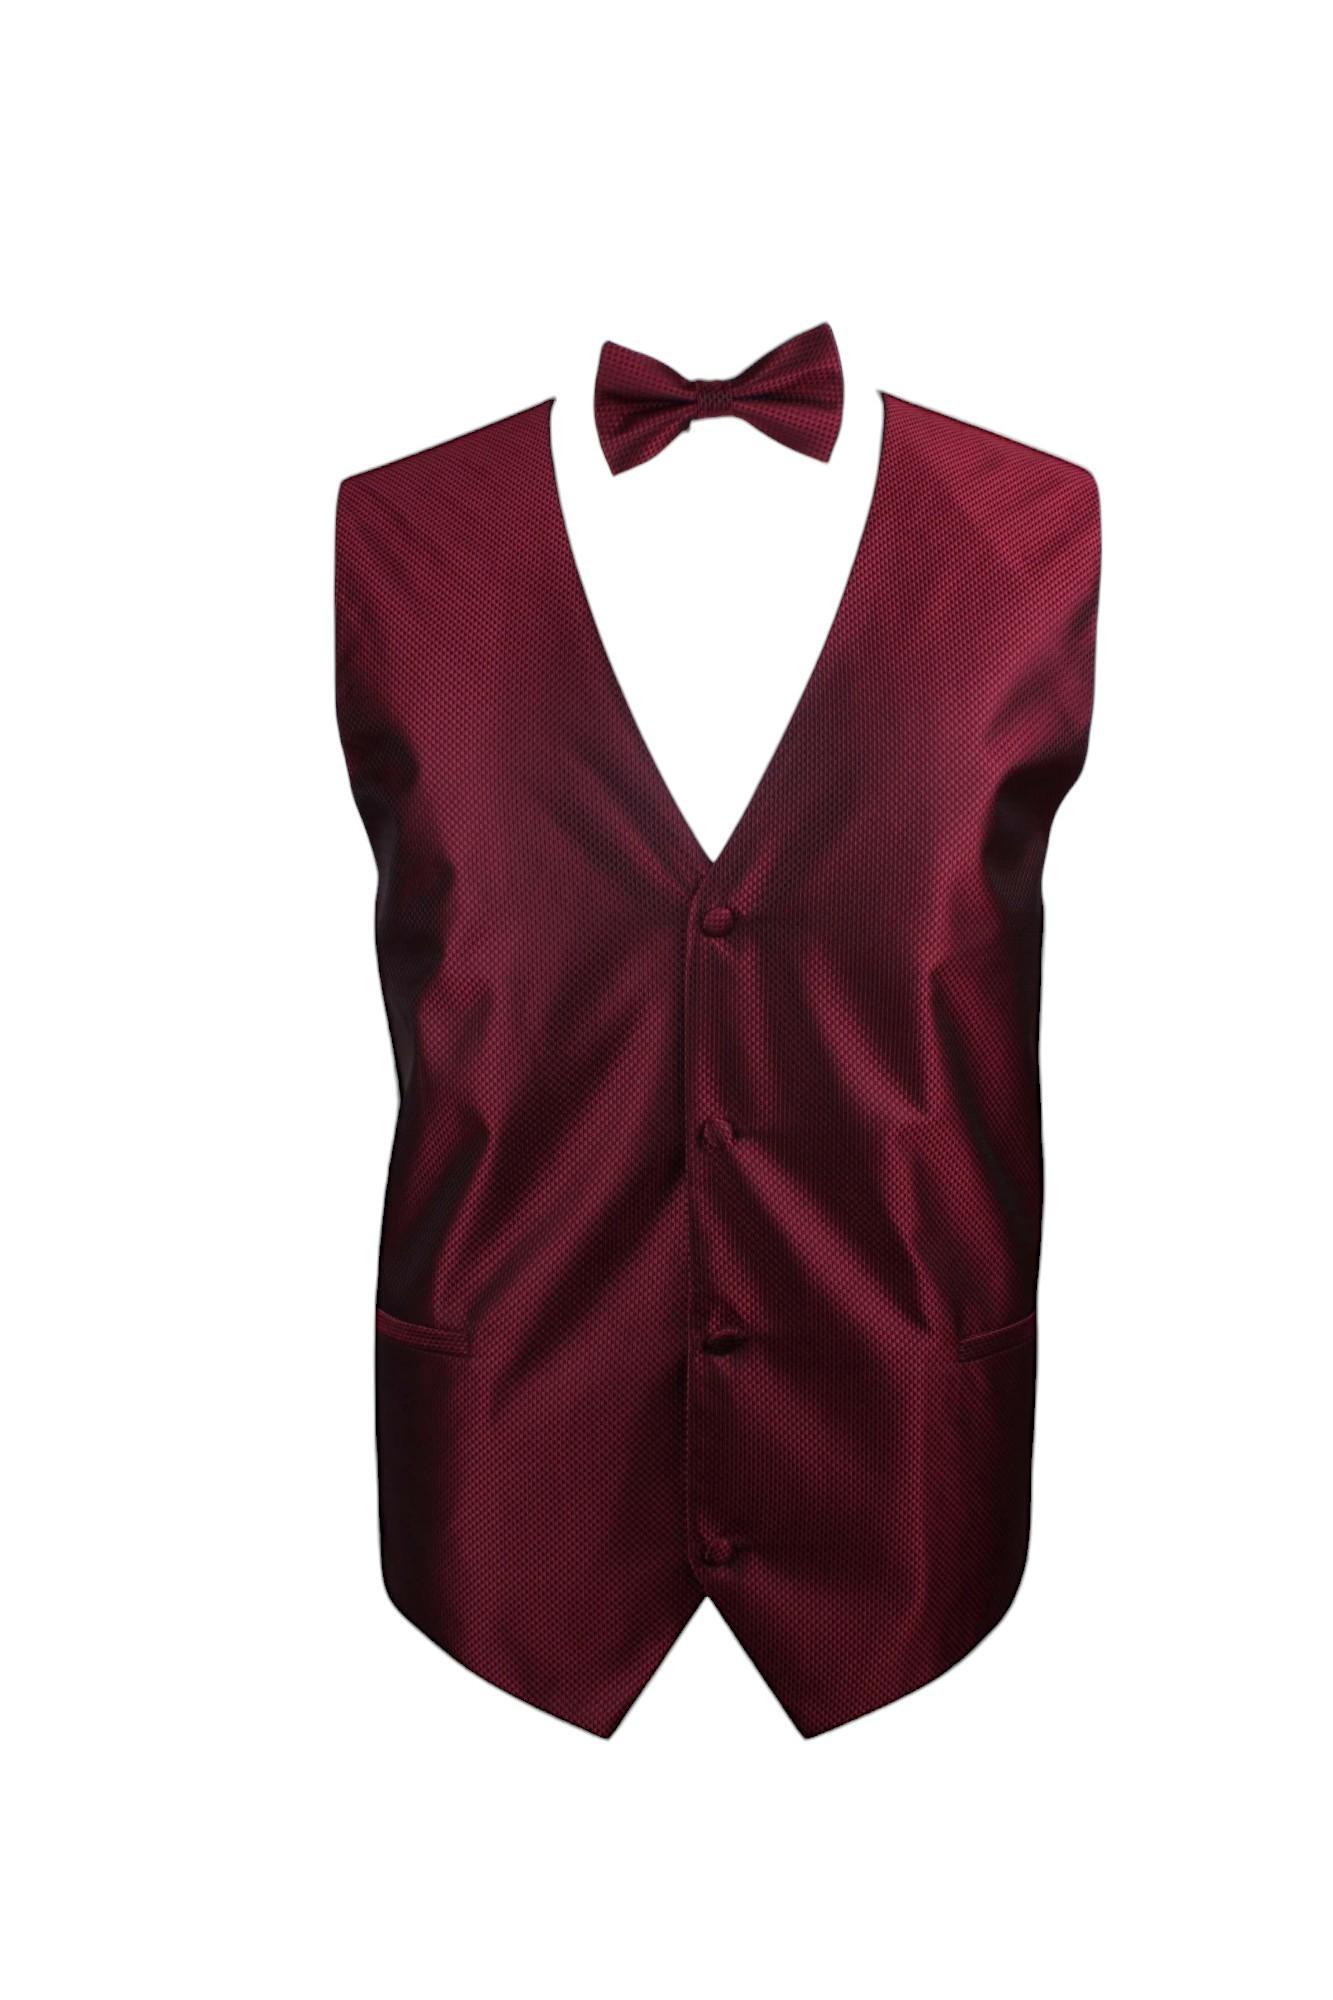 Mens Dark Red Checkered Patterned Vest Waistcoat & Matching Bow Tie